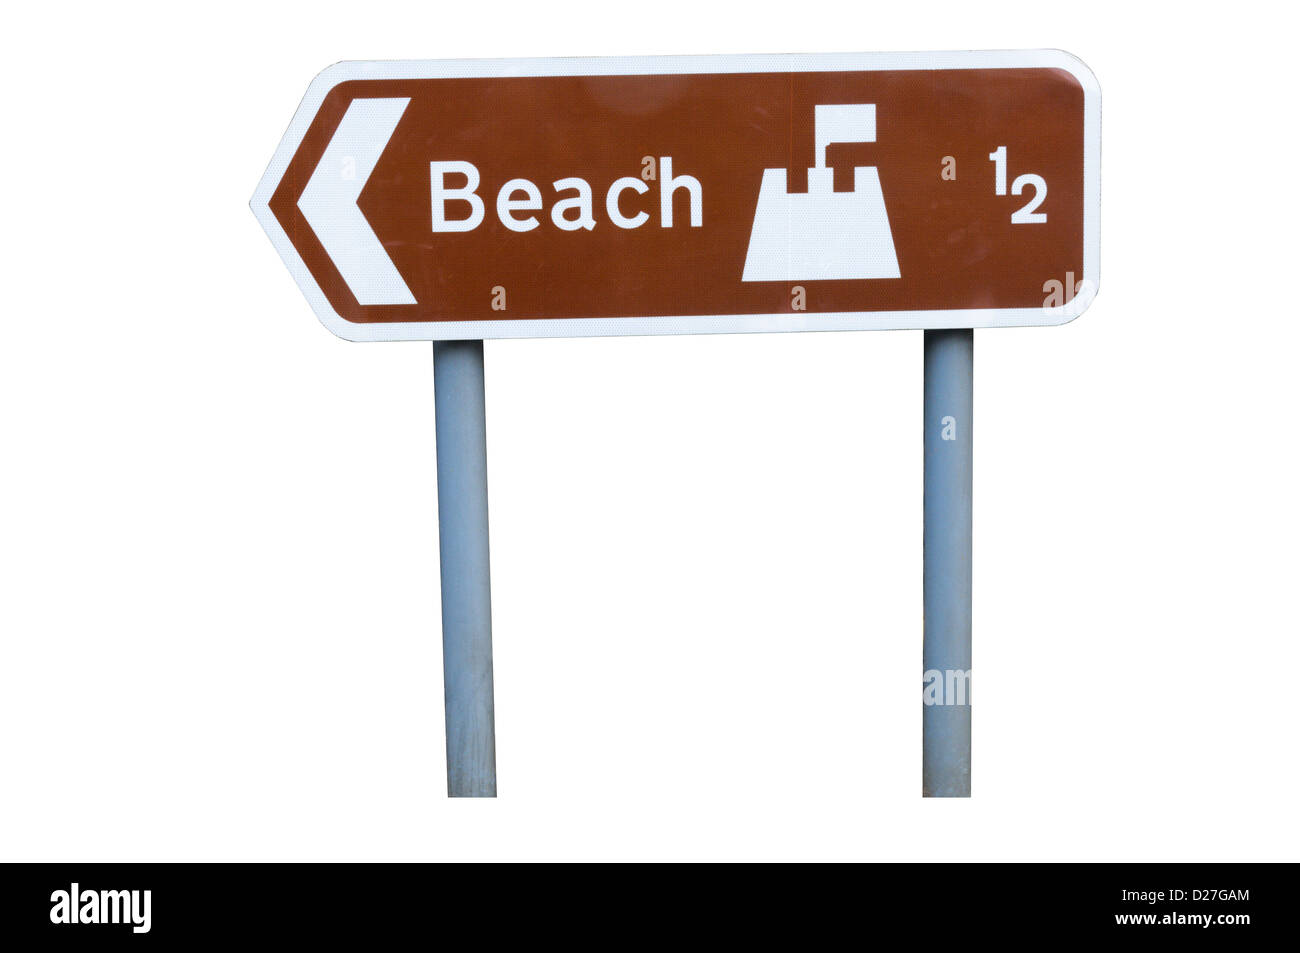 Brown tourist sign pointing to the beach with a sandcastle symbol Stock Photo